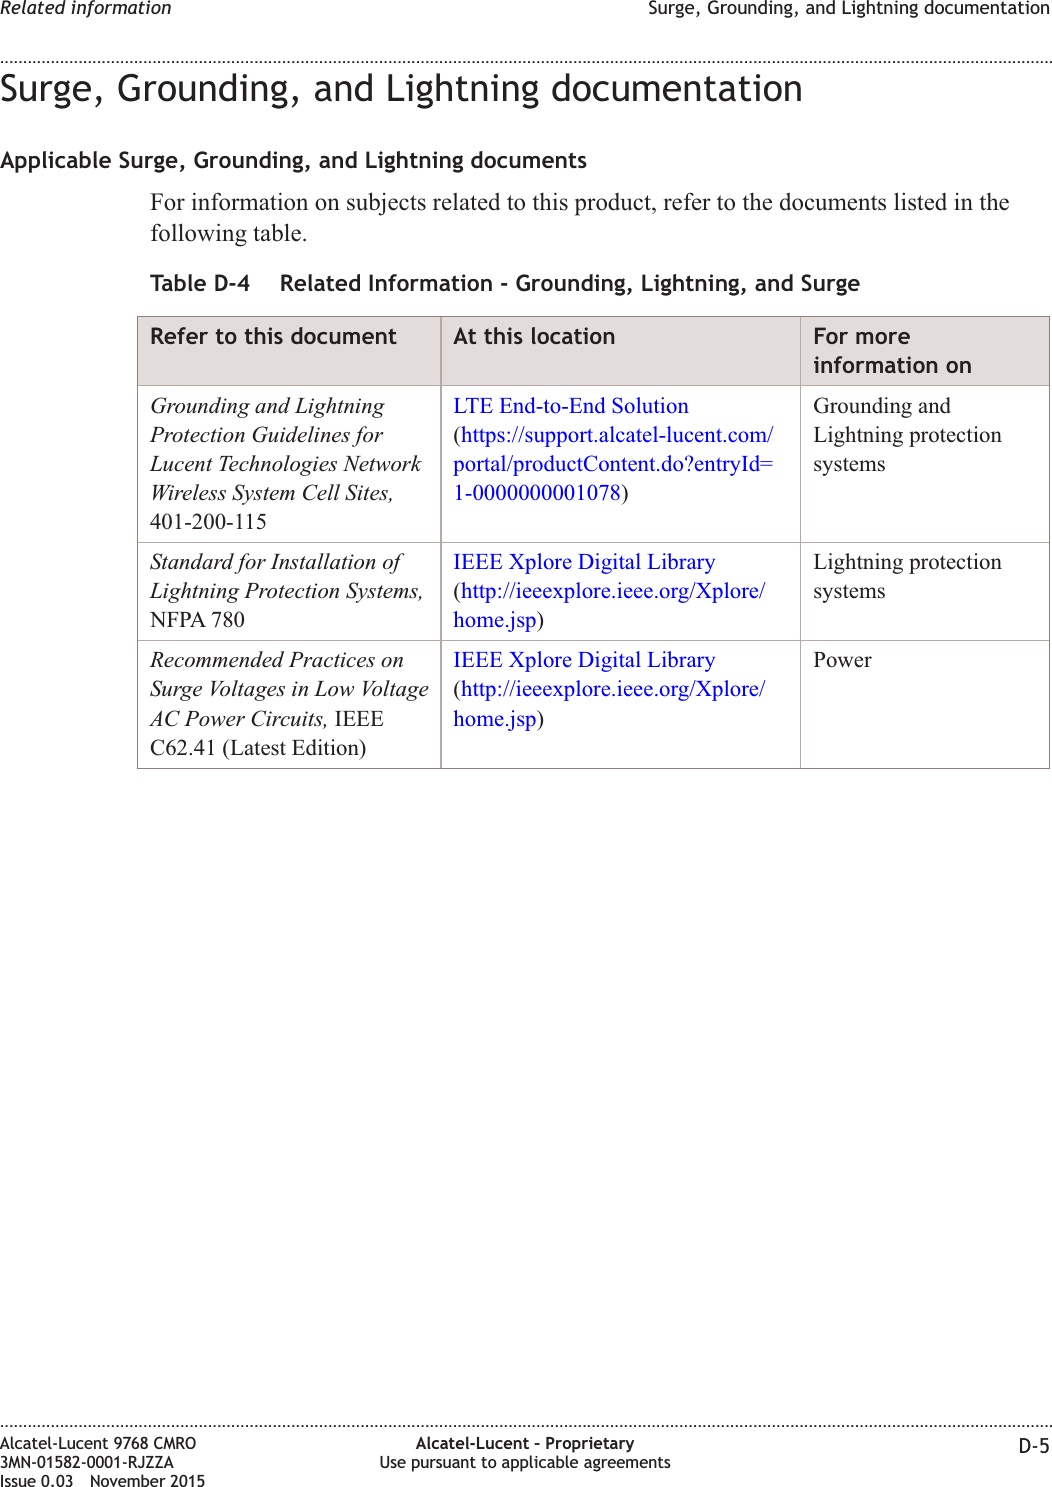 Surge, Grounding, and Lightning documentationApplicable Surge, Grounding, and Lightning documentsFor information on subjects related to this product, refer to the documents listed in thefollowing table.Table D-4 Related Information - Grounding, Lightning, and SurgeRefer to this document At this location For moreinformation onGrounding and LightningProtection Guidelines forLucent Technologies NetworkWireless System Cell Sites,401-200-115LTE End-to-End Solution(https://support.alcatel-lucent.com/portal/productContent.do?entryId=1-0000000001078)Grounding andLightning protectionsystemsStandard for Installation ofLightning Protection Systems,NFPA 780IEEE Xplore Digital Library(http://ieeexplore.ieee.org/Xplore/home.jsp)Lightning protectionsystemsRecommended Practices onSurge Voltages in Low VoltageAC Power Circuits, IEEEC62.41 (Latest Edition)IEEE Xplore Digital Library(http://ieeexplore.ieee.org/Xplore/home.jsp)PowerRelated information Surge, Grounding, and Lightning documentation........................................................................................................................................................................................................................................................................................................................................................................................................................................................................Alcatel-Lucent 9768 CMRO3MN-01582-0001-RJZZAIssue 0.03 November 2015Alcatel-Lucent – ProprietaryUse pursuant to applicable agreements D-5DRAFTDRAFT